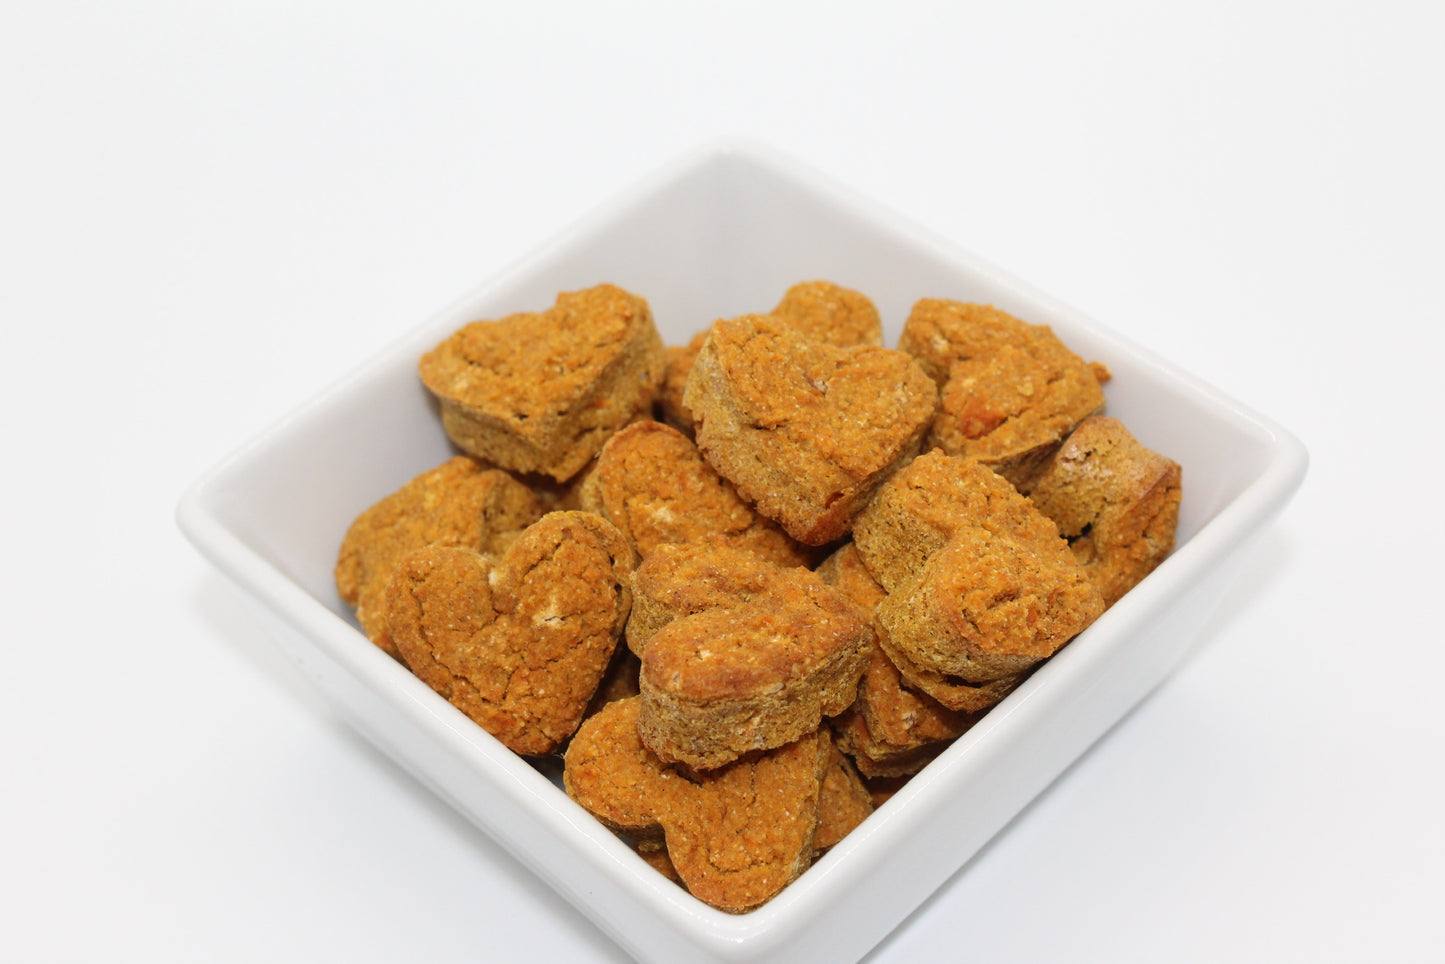 A white, square bowl filled with bite-sized, heart-shaped training treats for dogs in sweet potato and carrot flavor. Pieces of carrots can be seen throughout the treats.